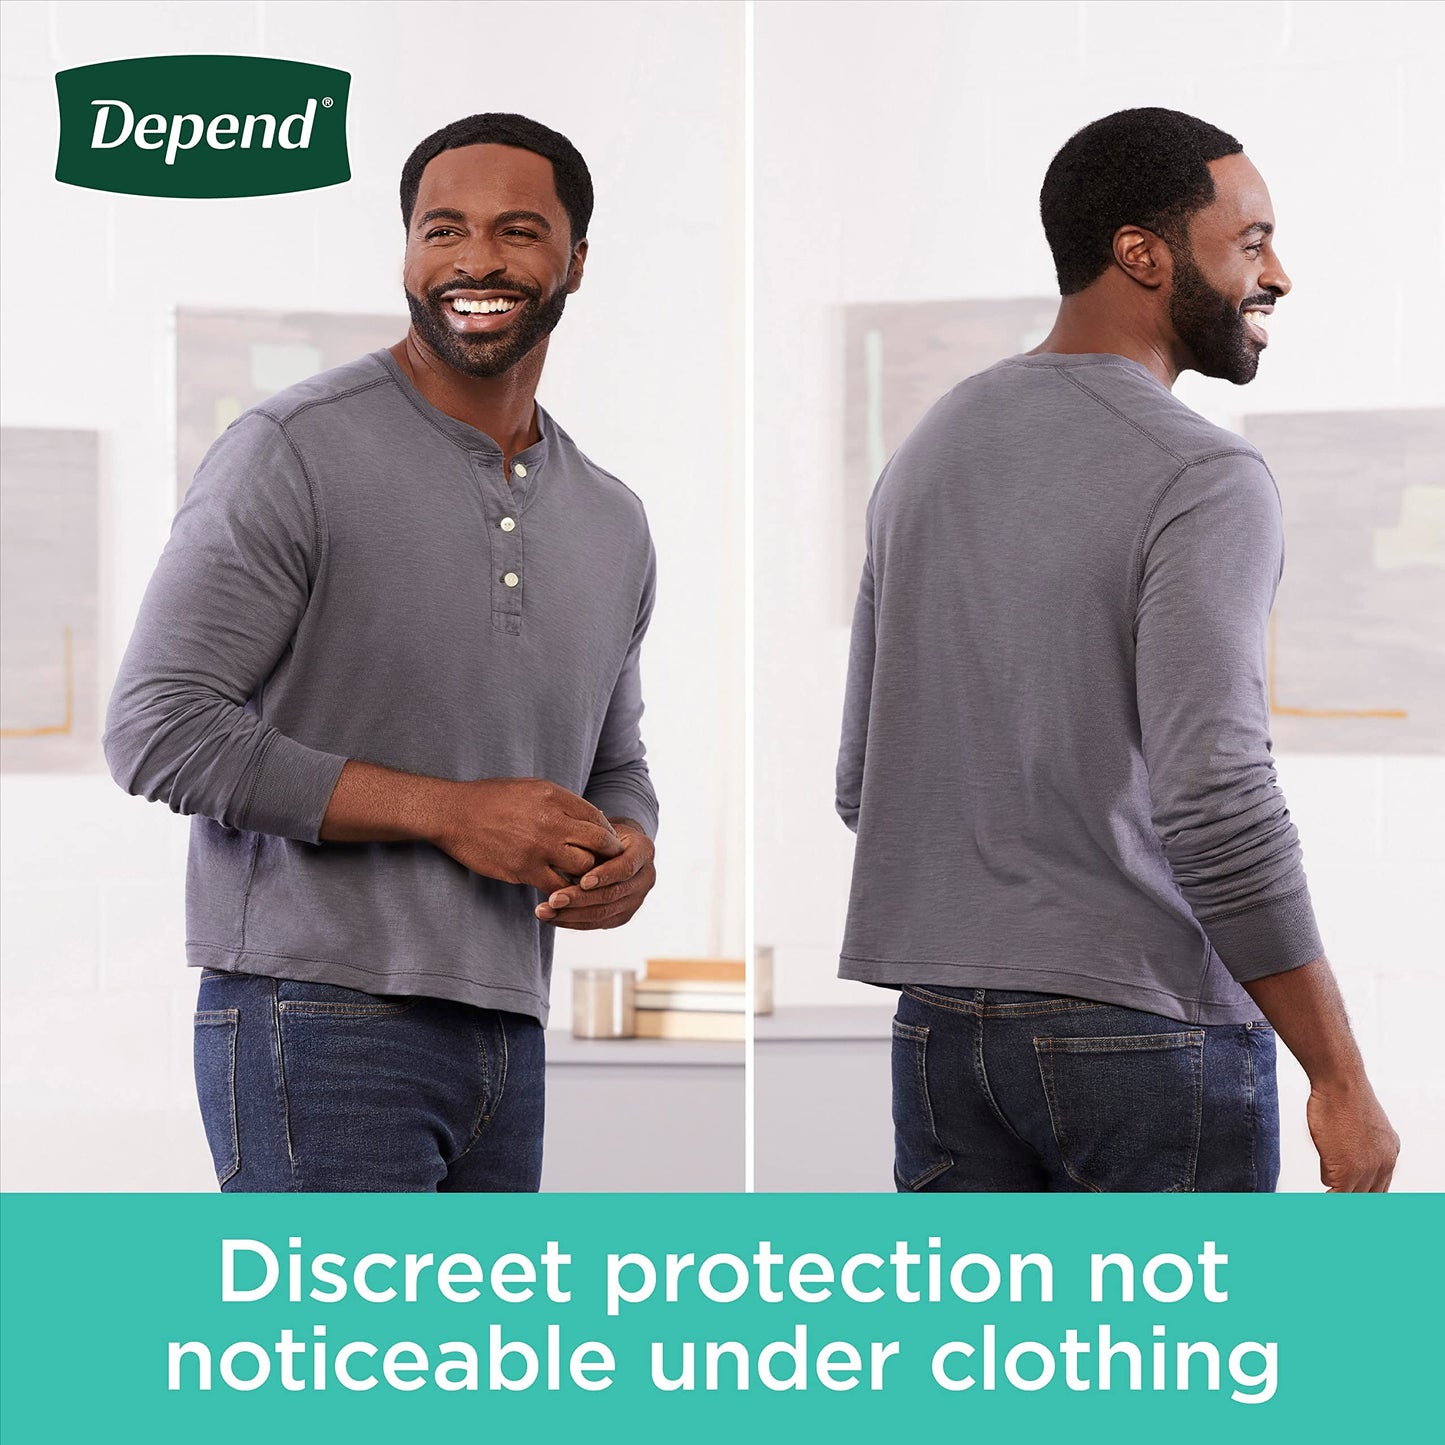 Depend Fresh Protection Adult Incontinence Underwear for Men (Formerly Depend Fit-Flex), Disposable, Maximum, Large, Grey, 28 Count, Packaging May Vary